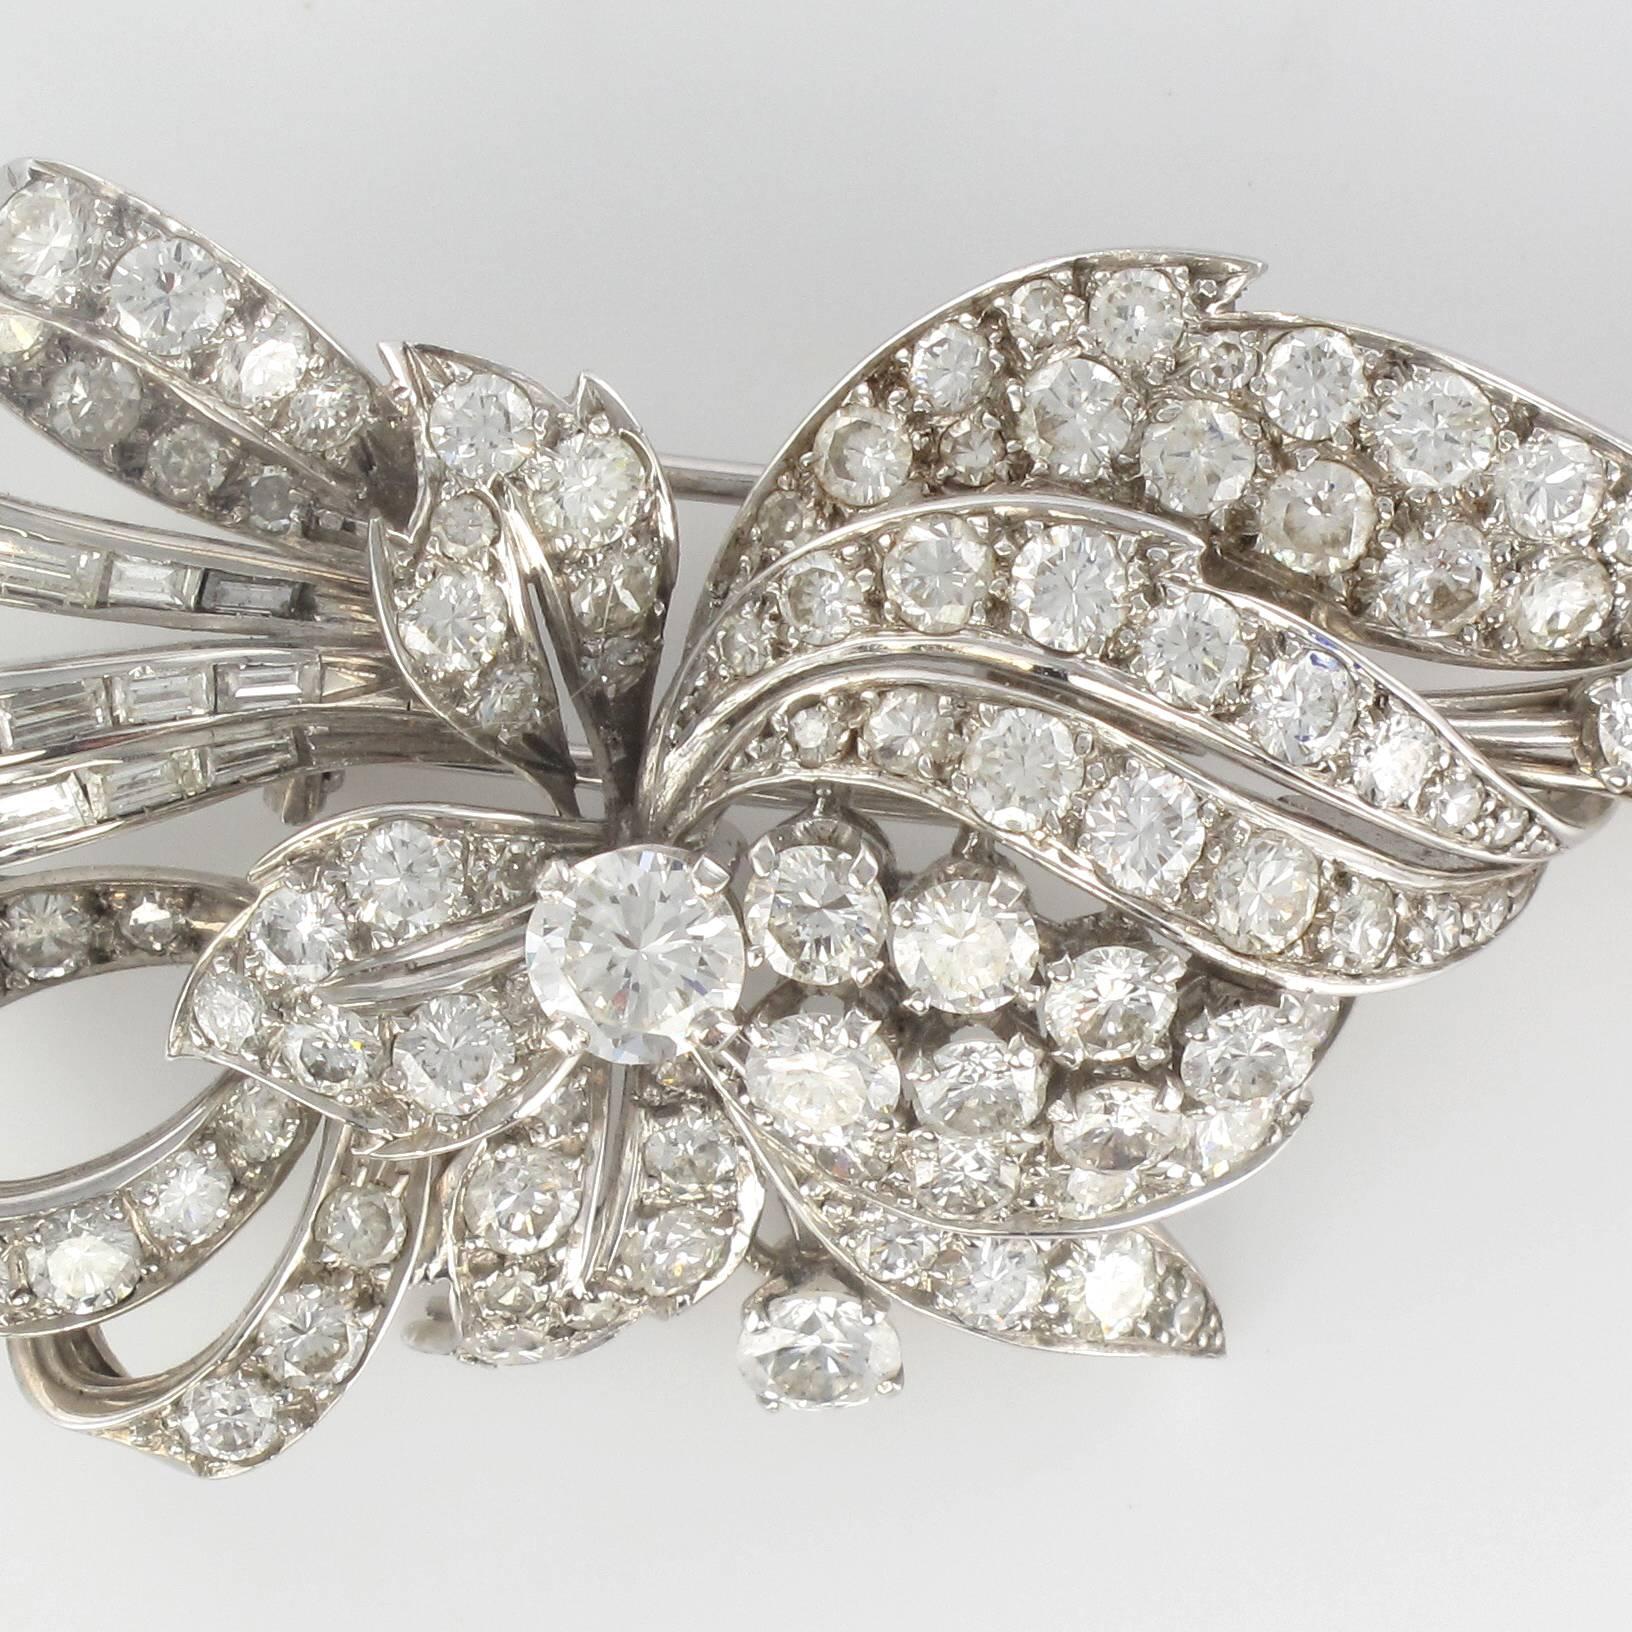 1950s French 7.5 Carats Baguette and Brilliant Cut Diamonds Gold Brooch For Sale 8